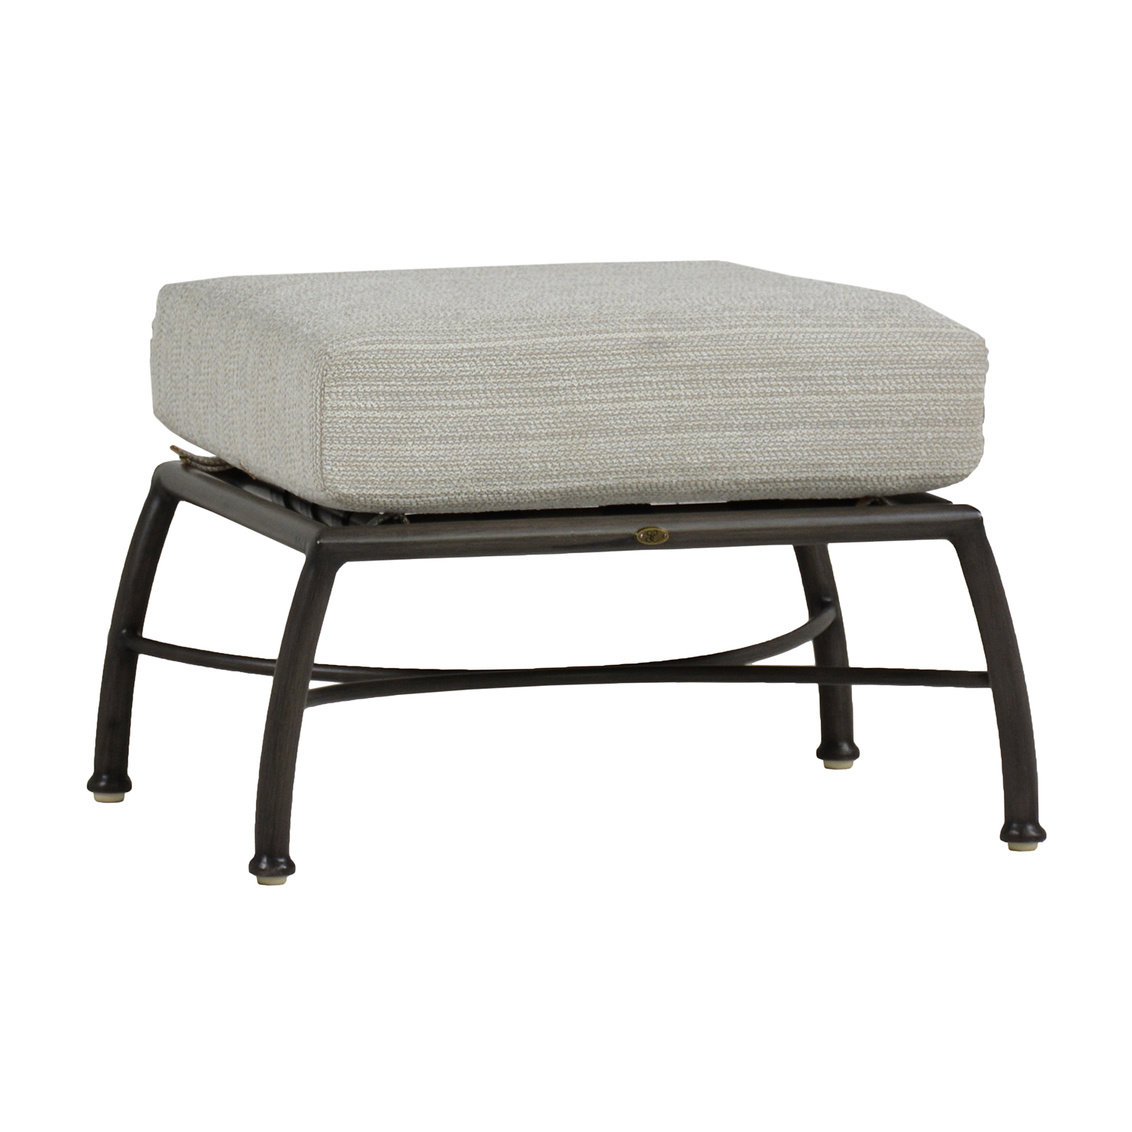 majorca ottoman in slate grey – frame only product image